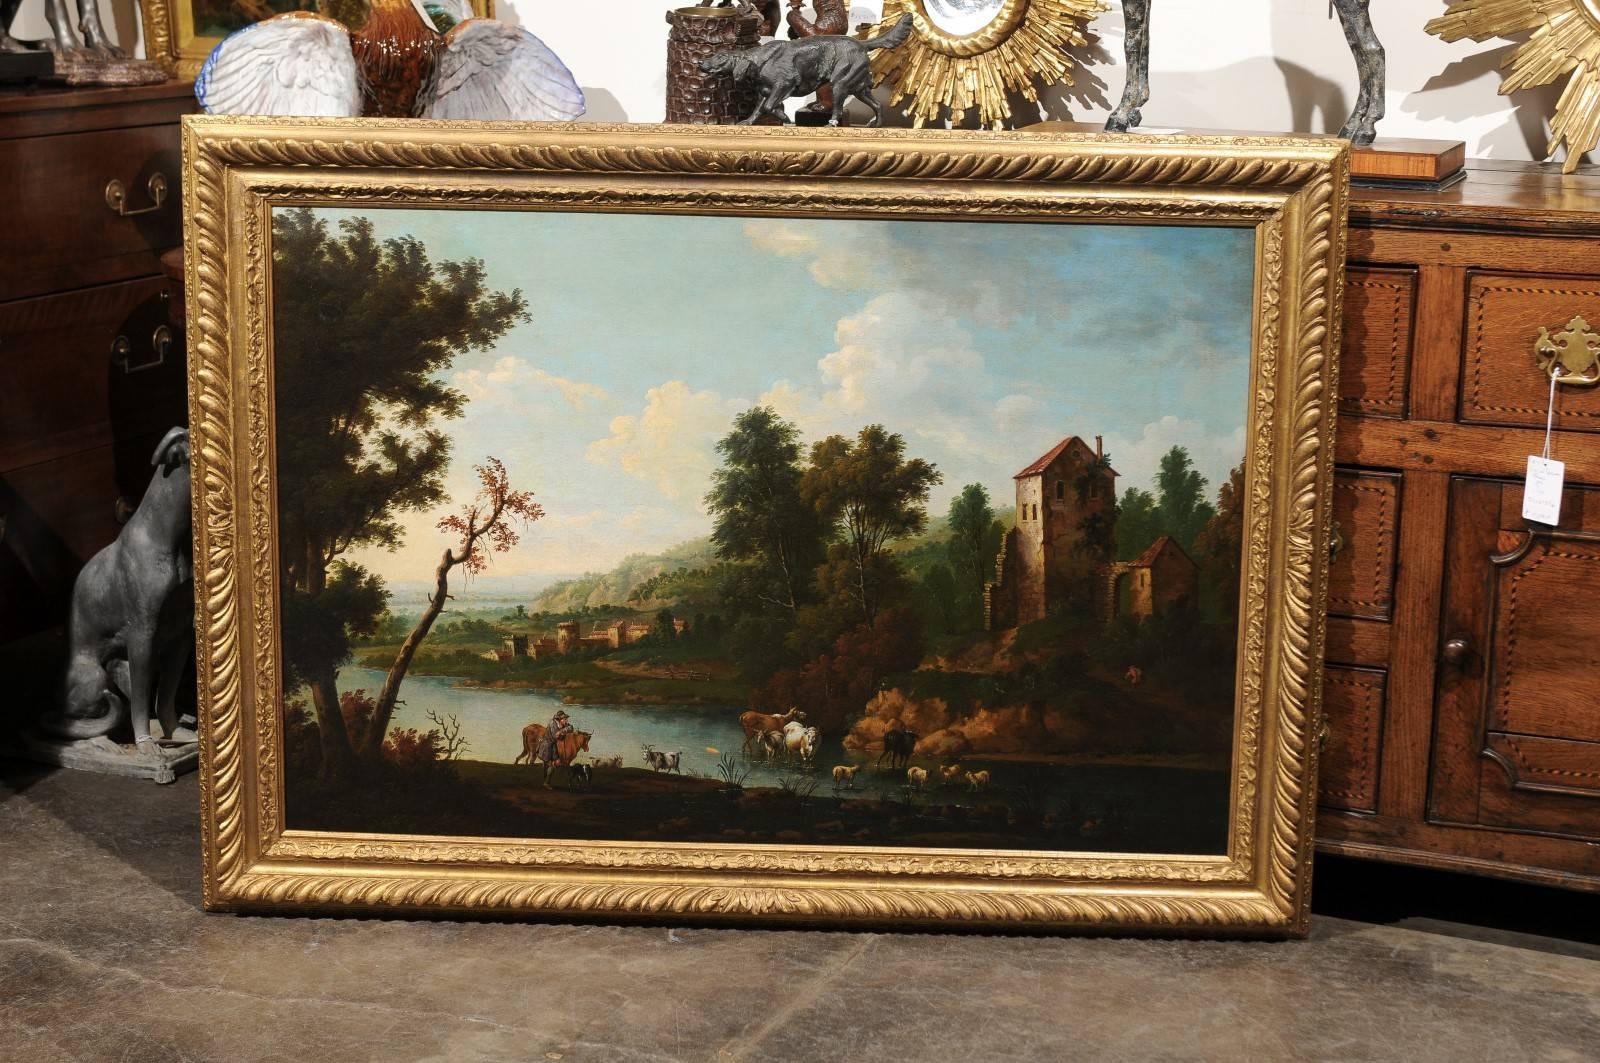 An English early 19th century painting of the Italian countryside. This English painting depicts a traditional scene of animals in a country setting. The careful composition places two trees close to the center of the piece while another set of